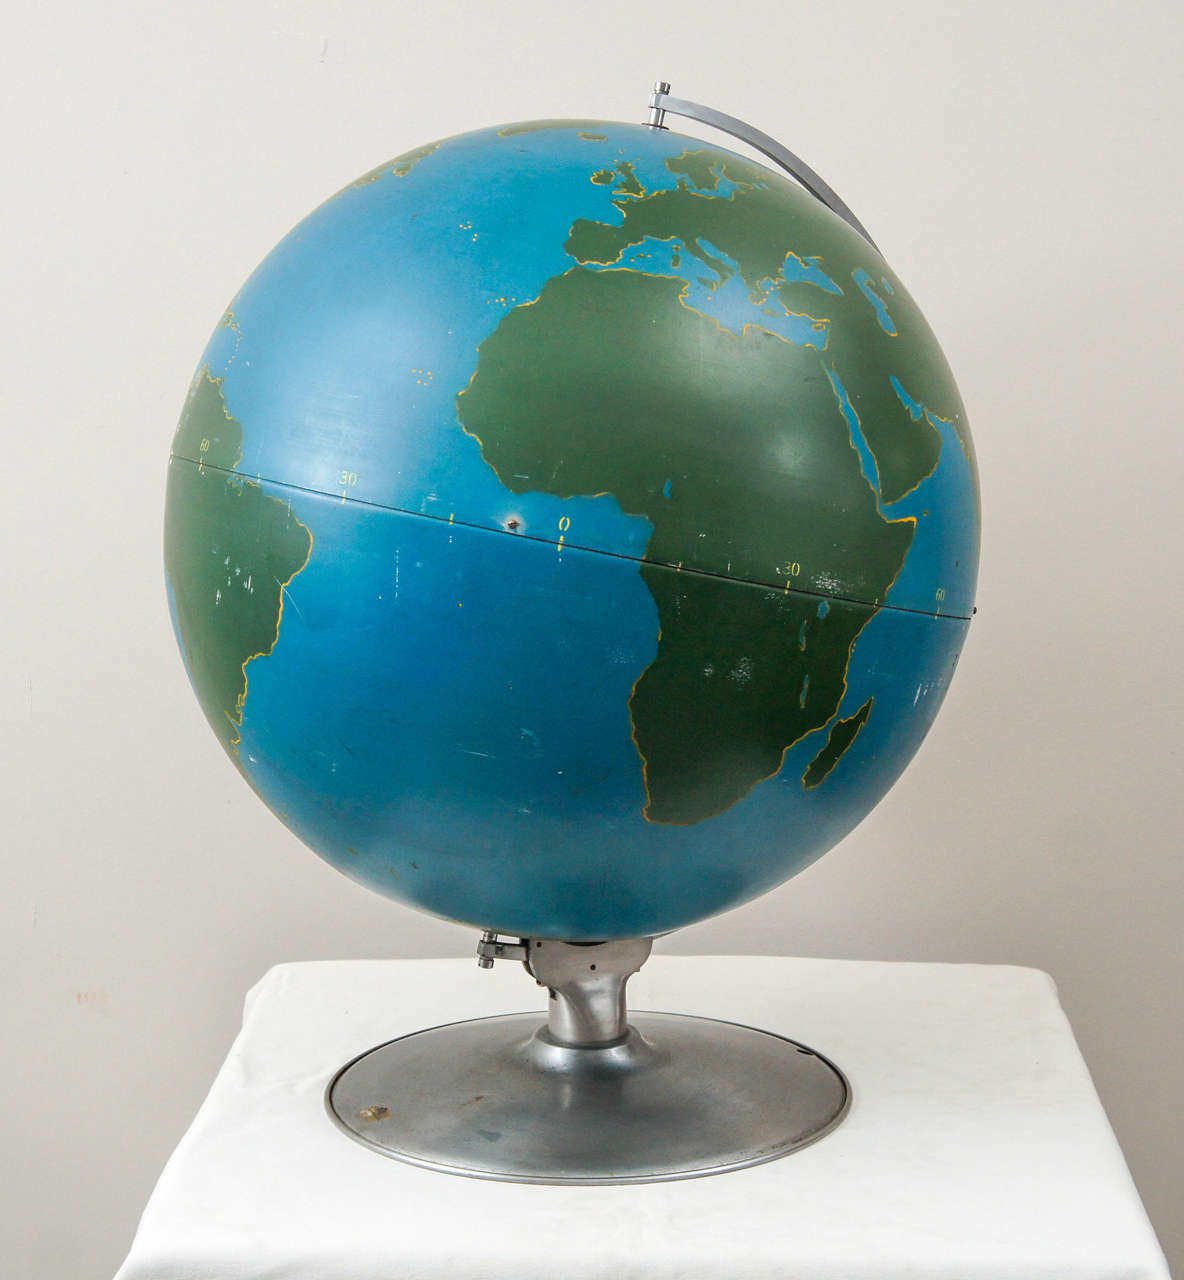 Good looking Aviation Globe by Nystrom & Co. Chicago.